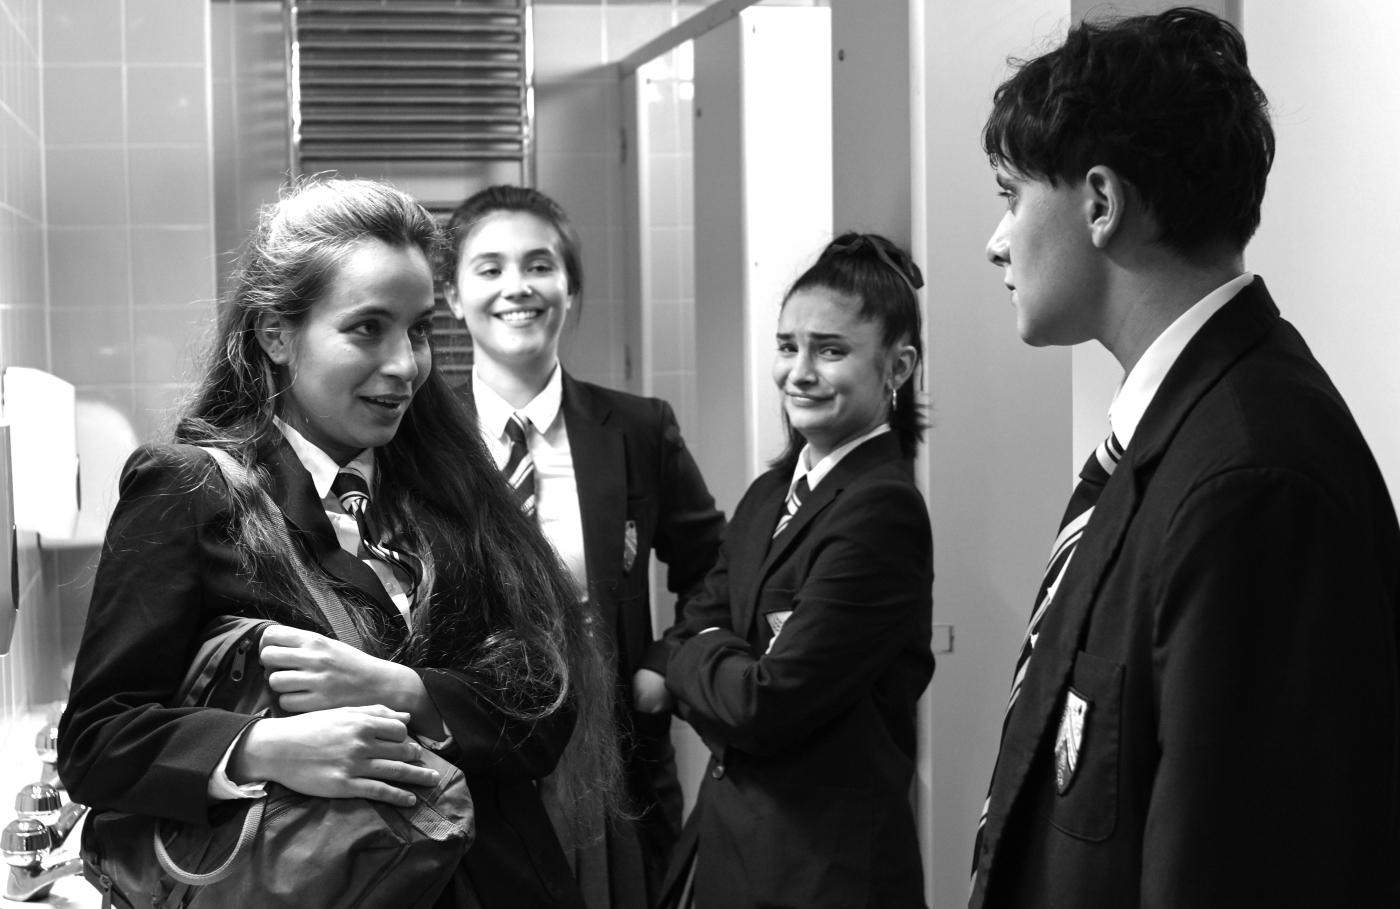 A bunch of teenagers stand in a secondary school girls’ bathroom, dressed in school uniforms with shirts, ties, and blazers. Three of the girls are clearly bullying a young trans man, laughing at him and mocking him. His shoulders are sagged, face a mask of resignation. One of the girls looks right into the camera, as if to include the audience in the bullying moment.